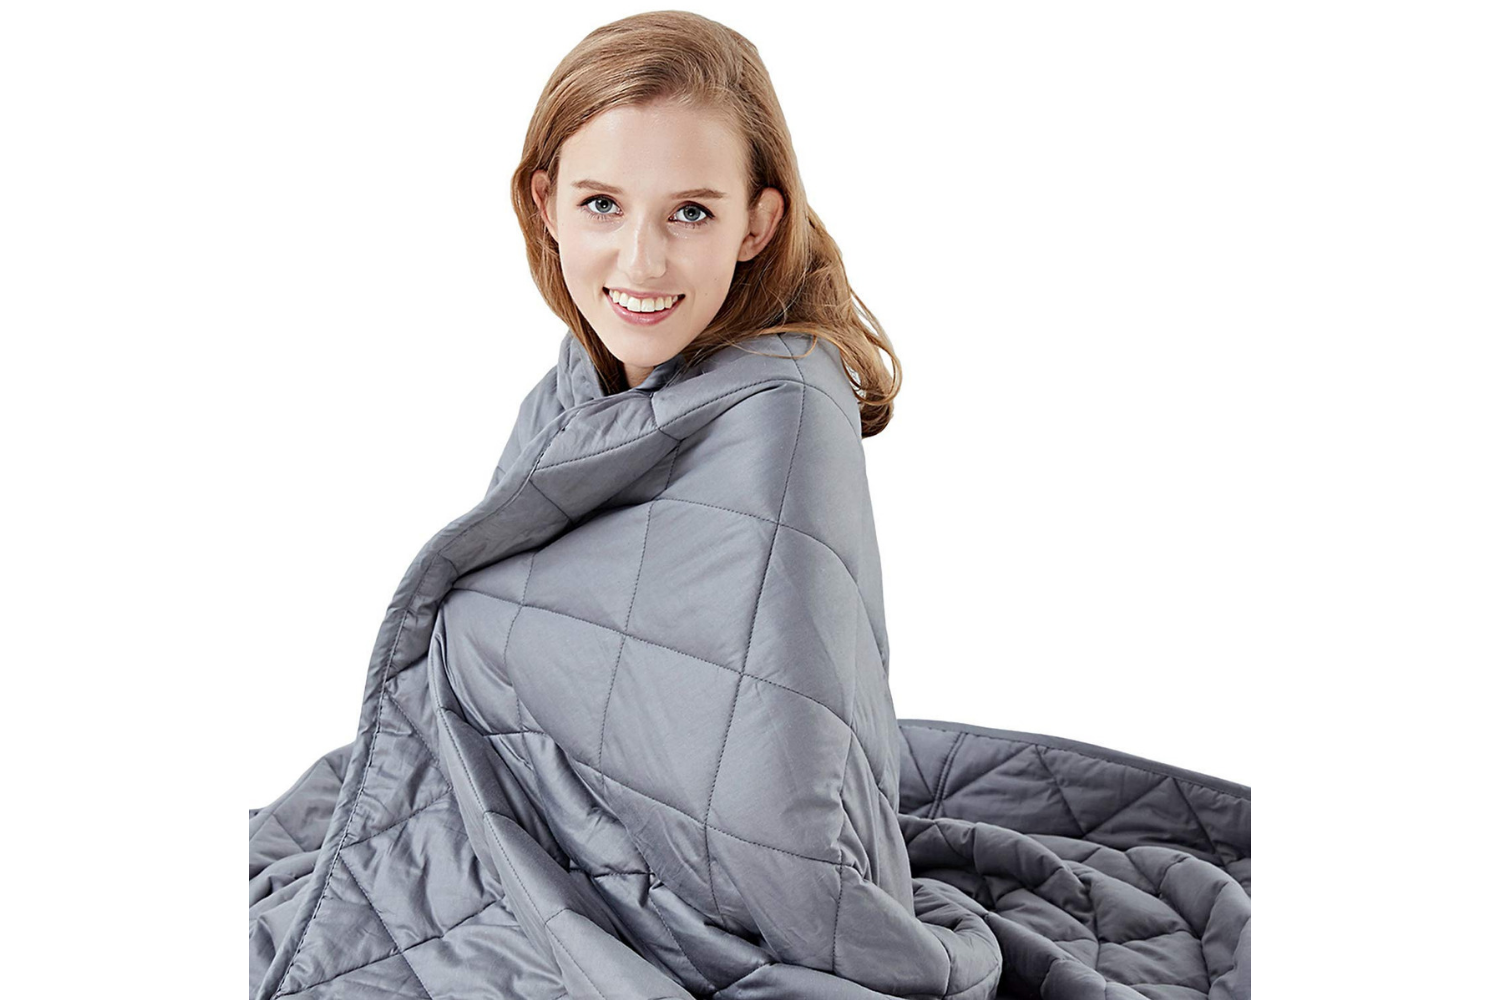 The Best Weighted Blankets for Improving Sleep and Easing Anxiety